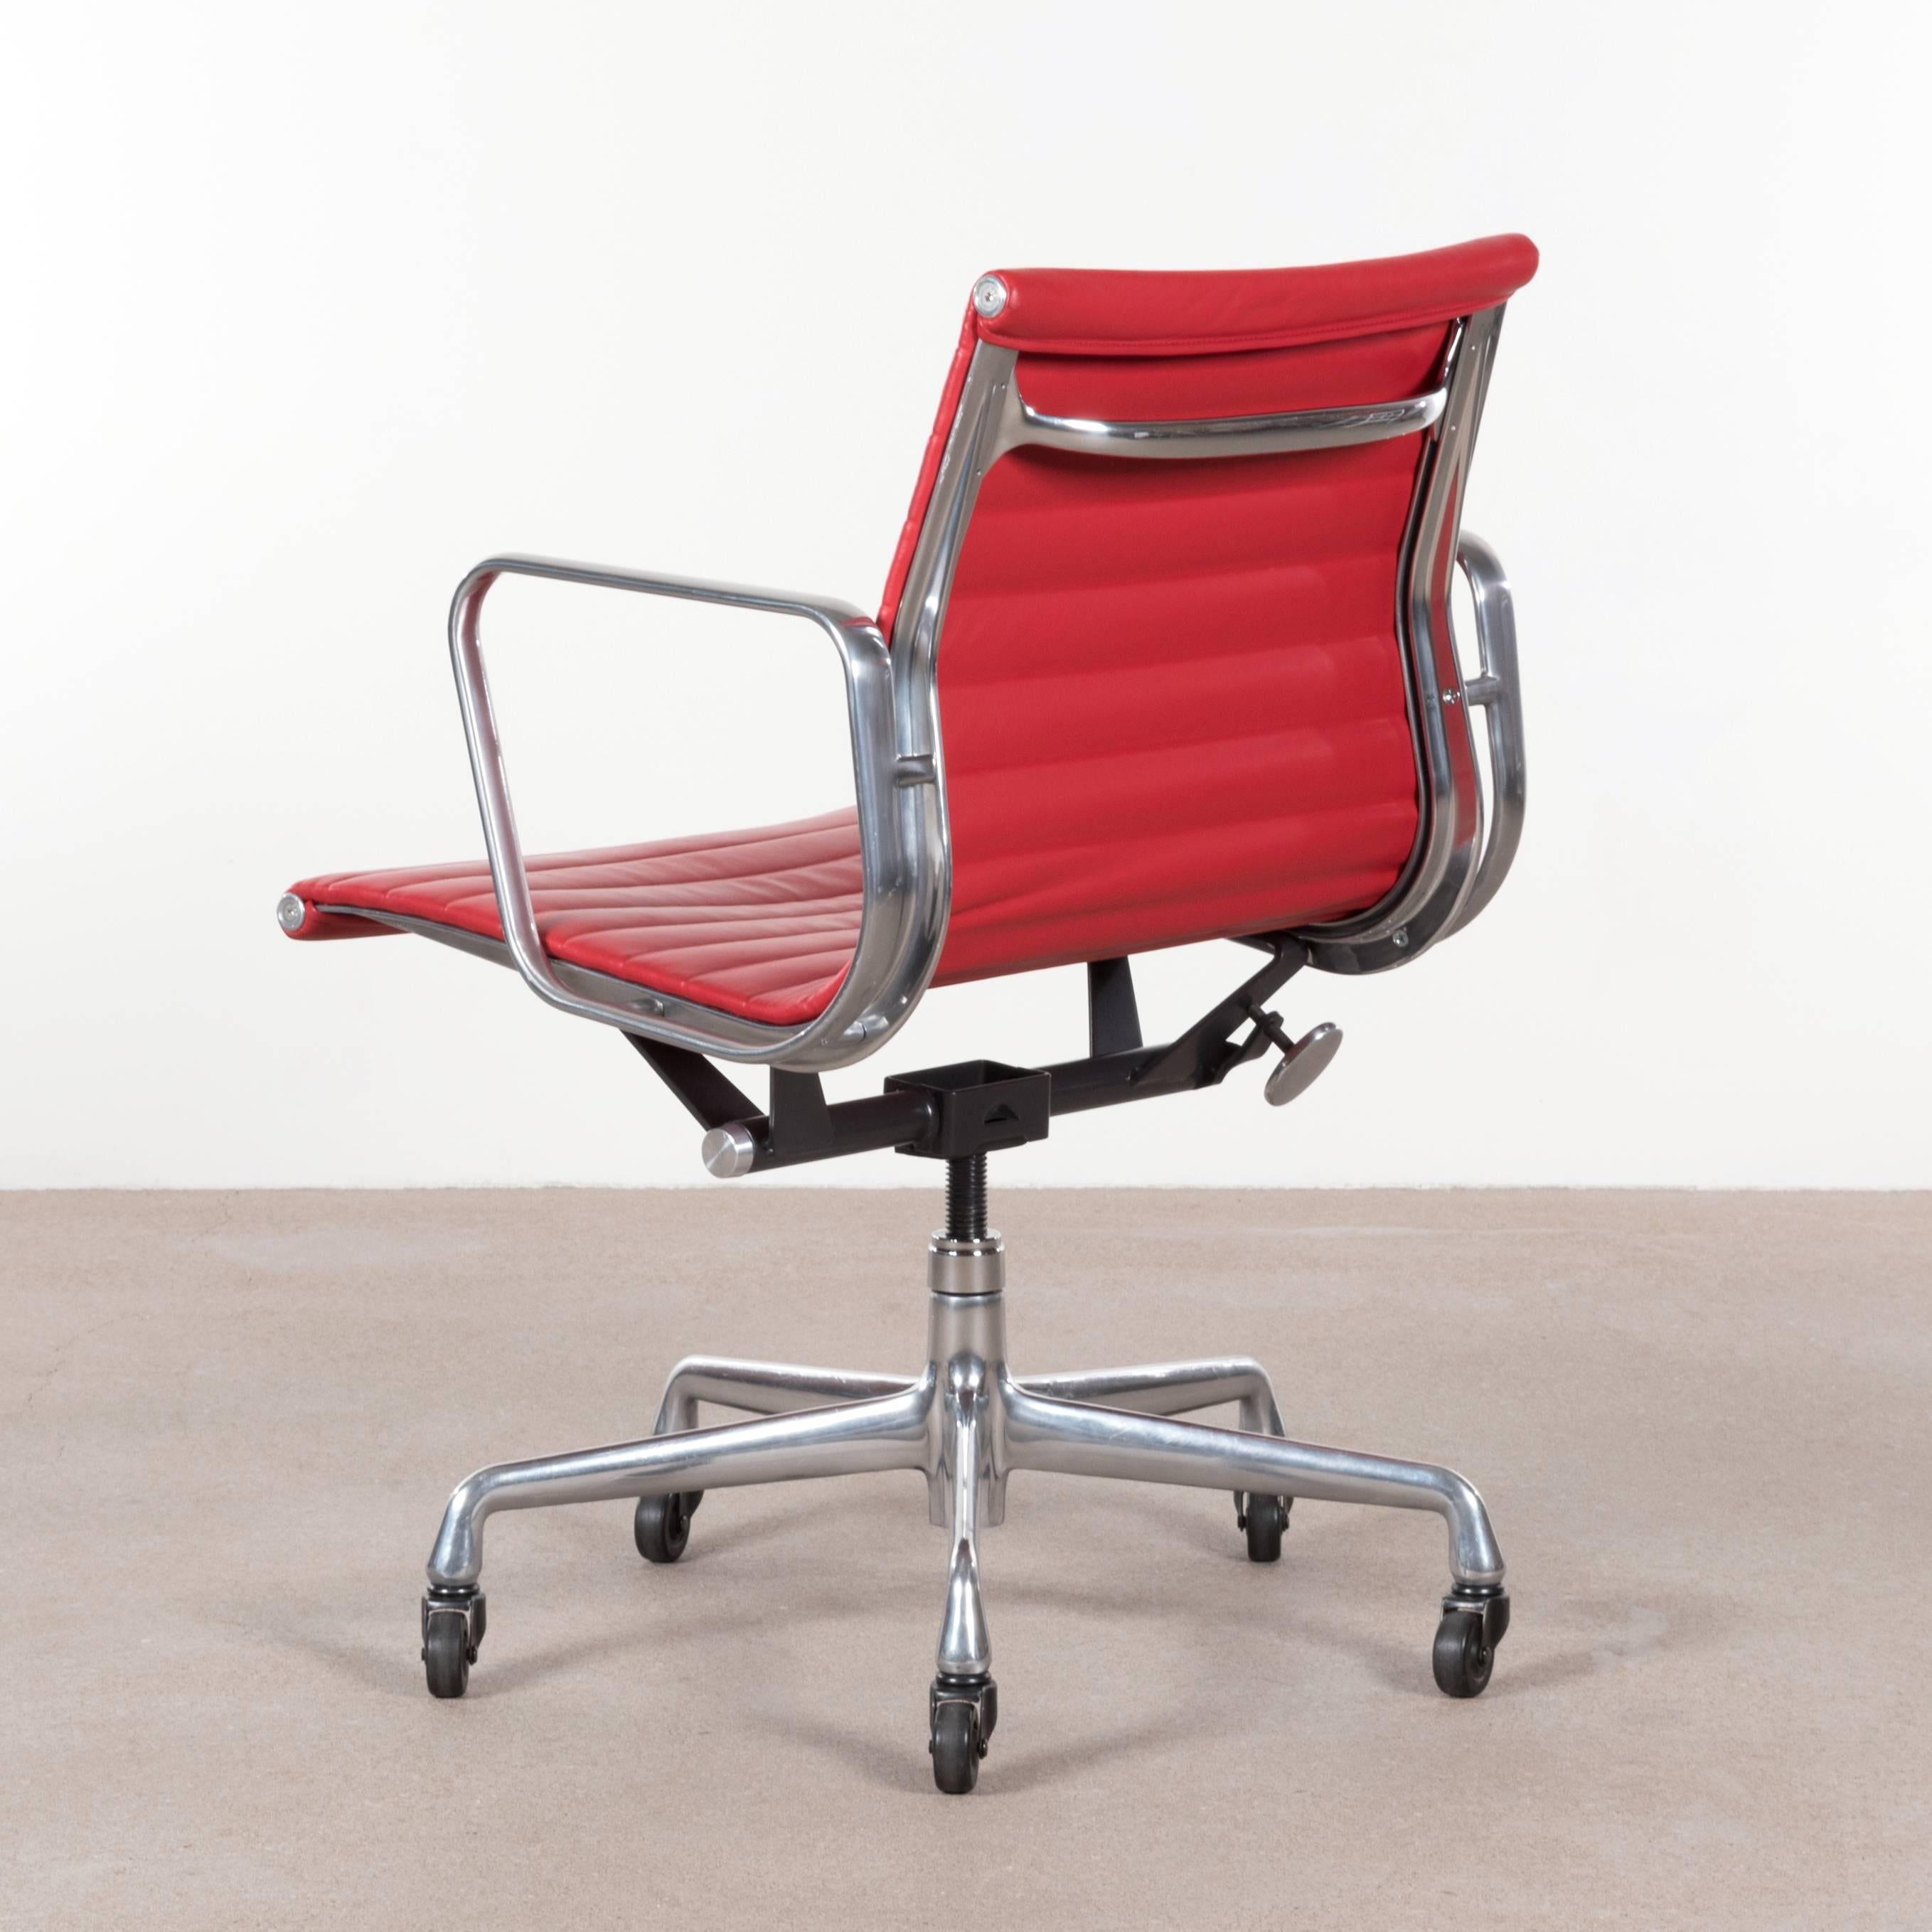 Eames EA335 management office chair in bright red leather with five-star base, spindle and tilt-swivel mechanism. Very good / excellent original condition signed with manufacturer's label. Multiple chairs available.